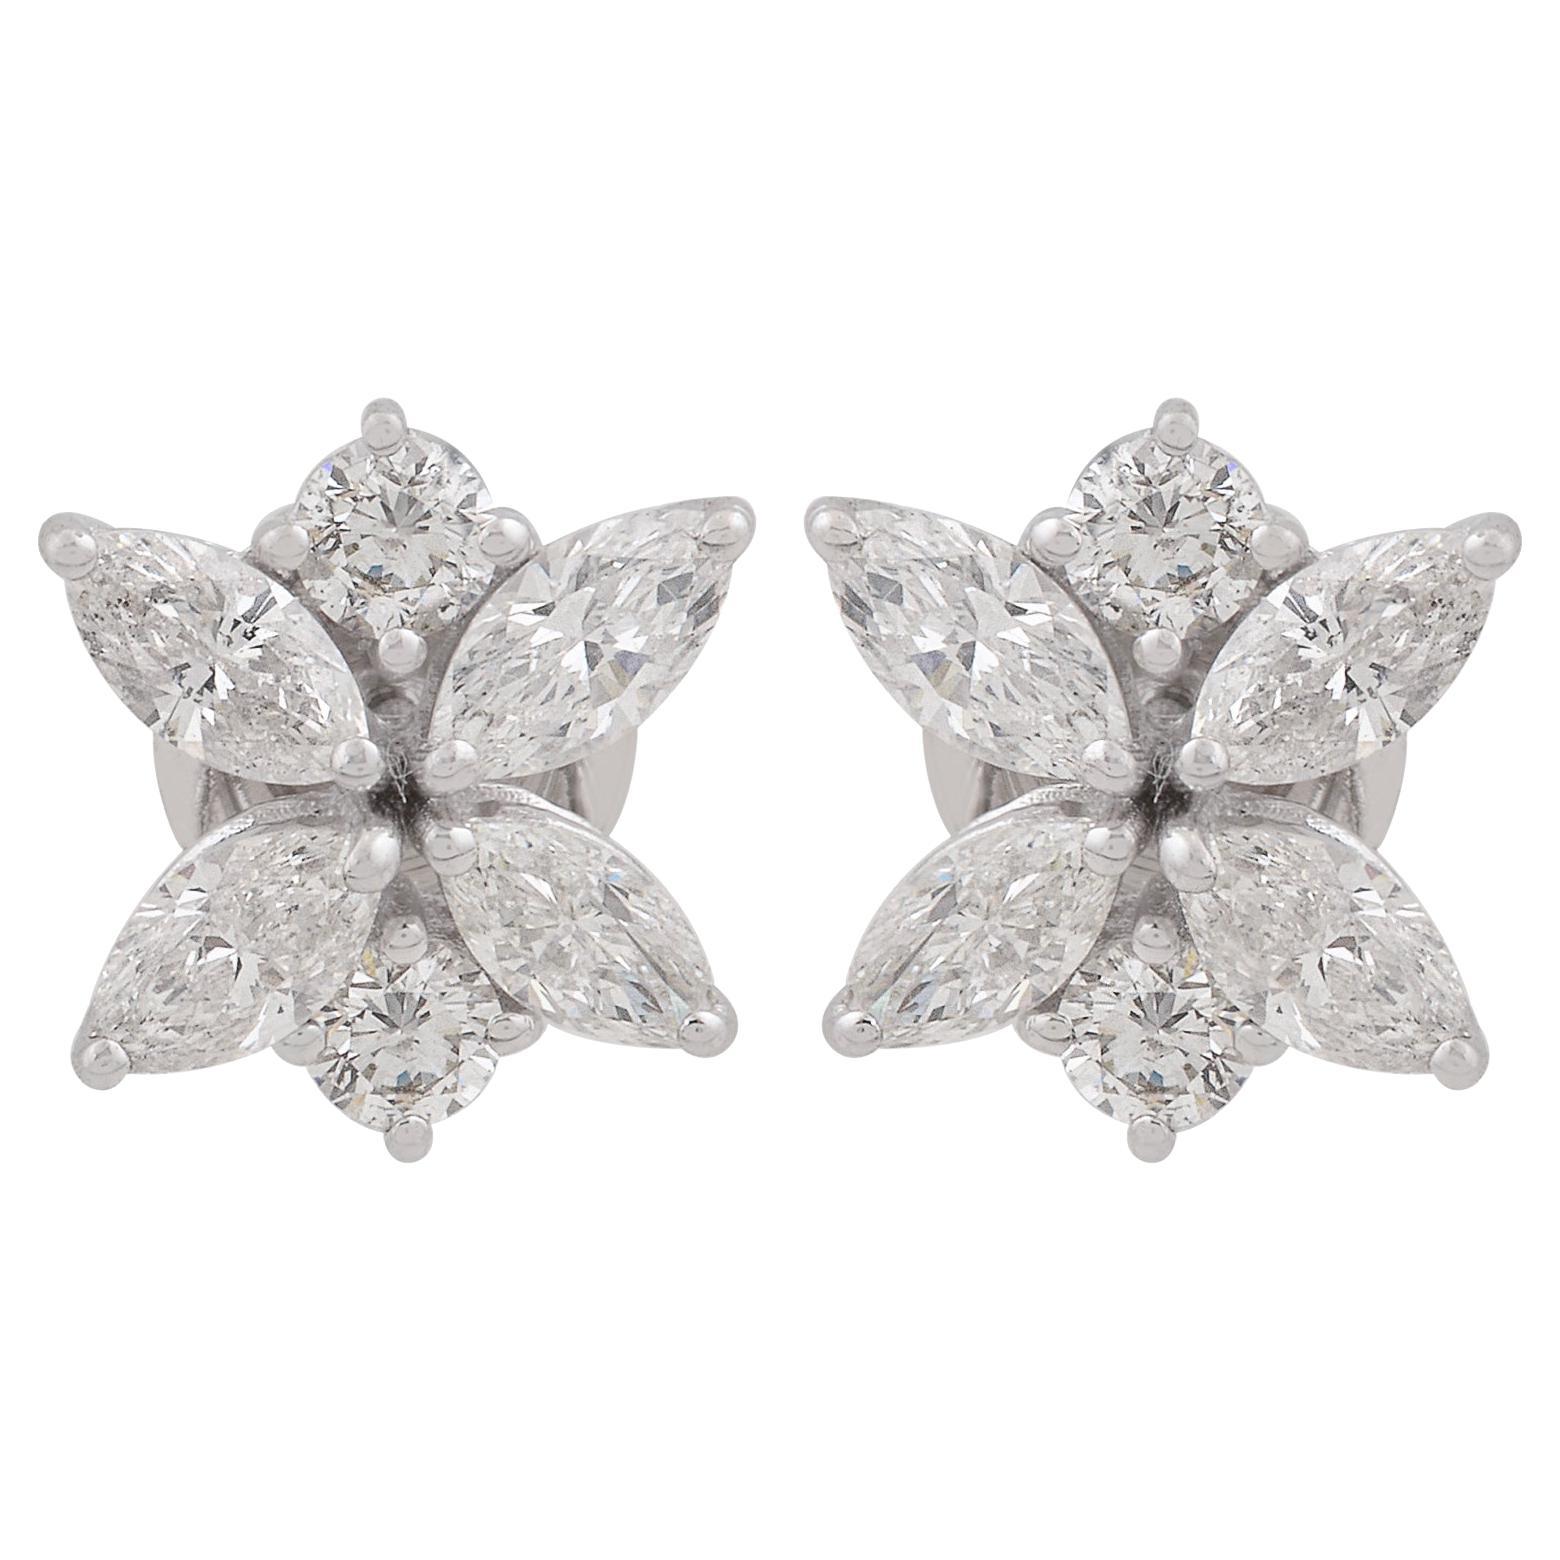 SI Clarity HI Color Marquise Round Diamond Stud Earrings 18 Karat White Gold